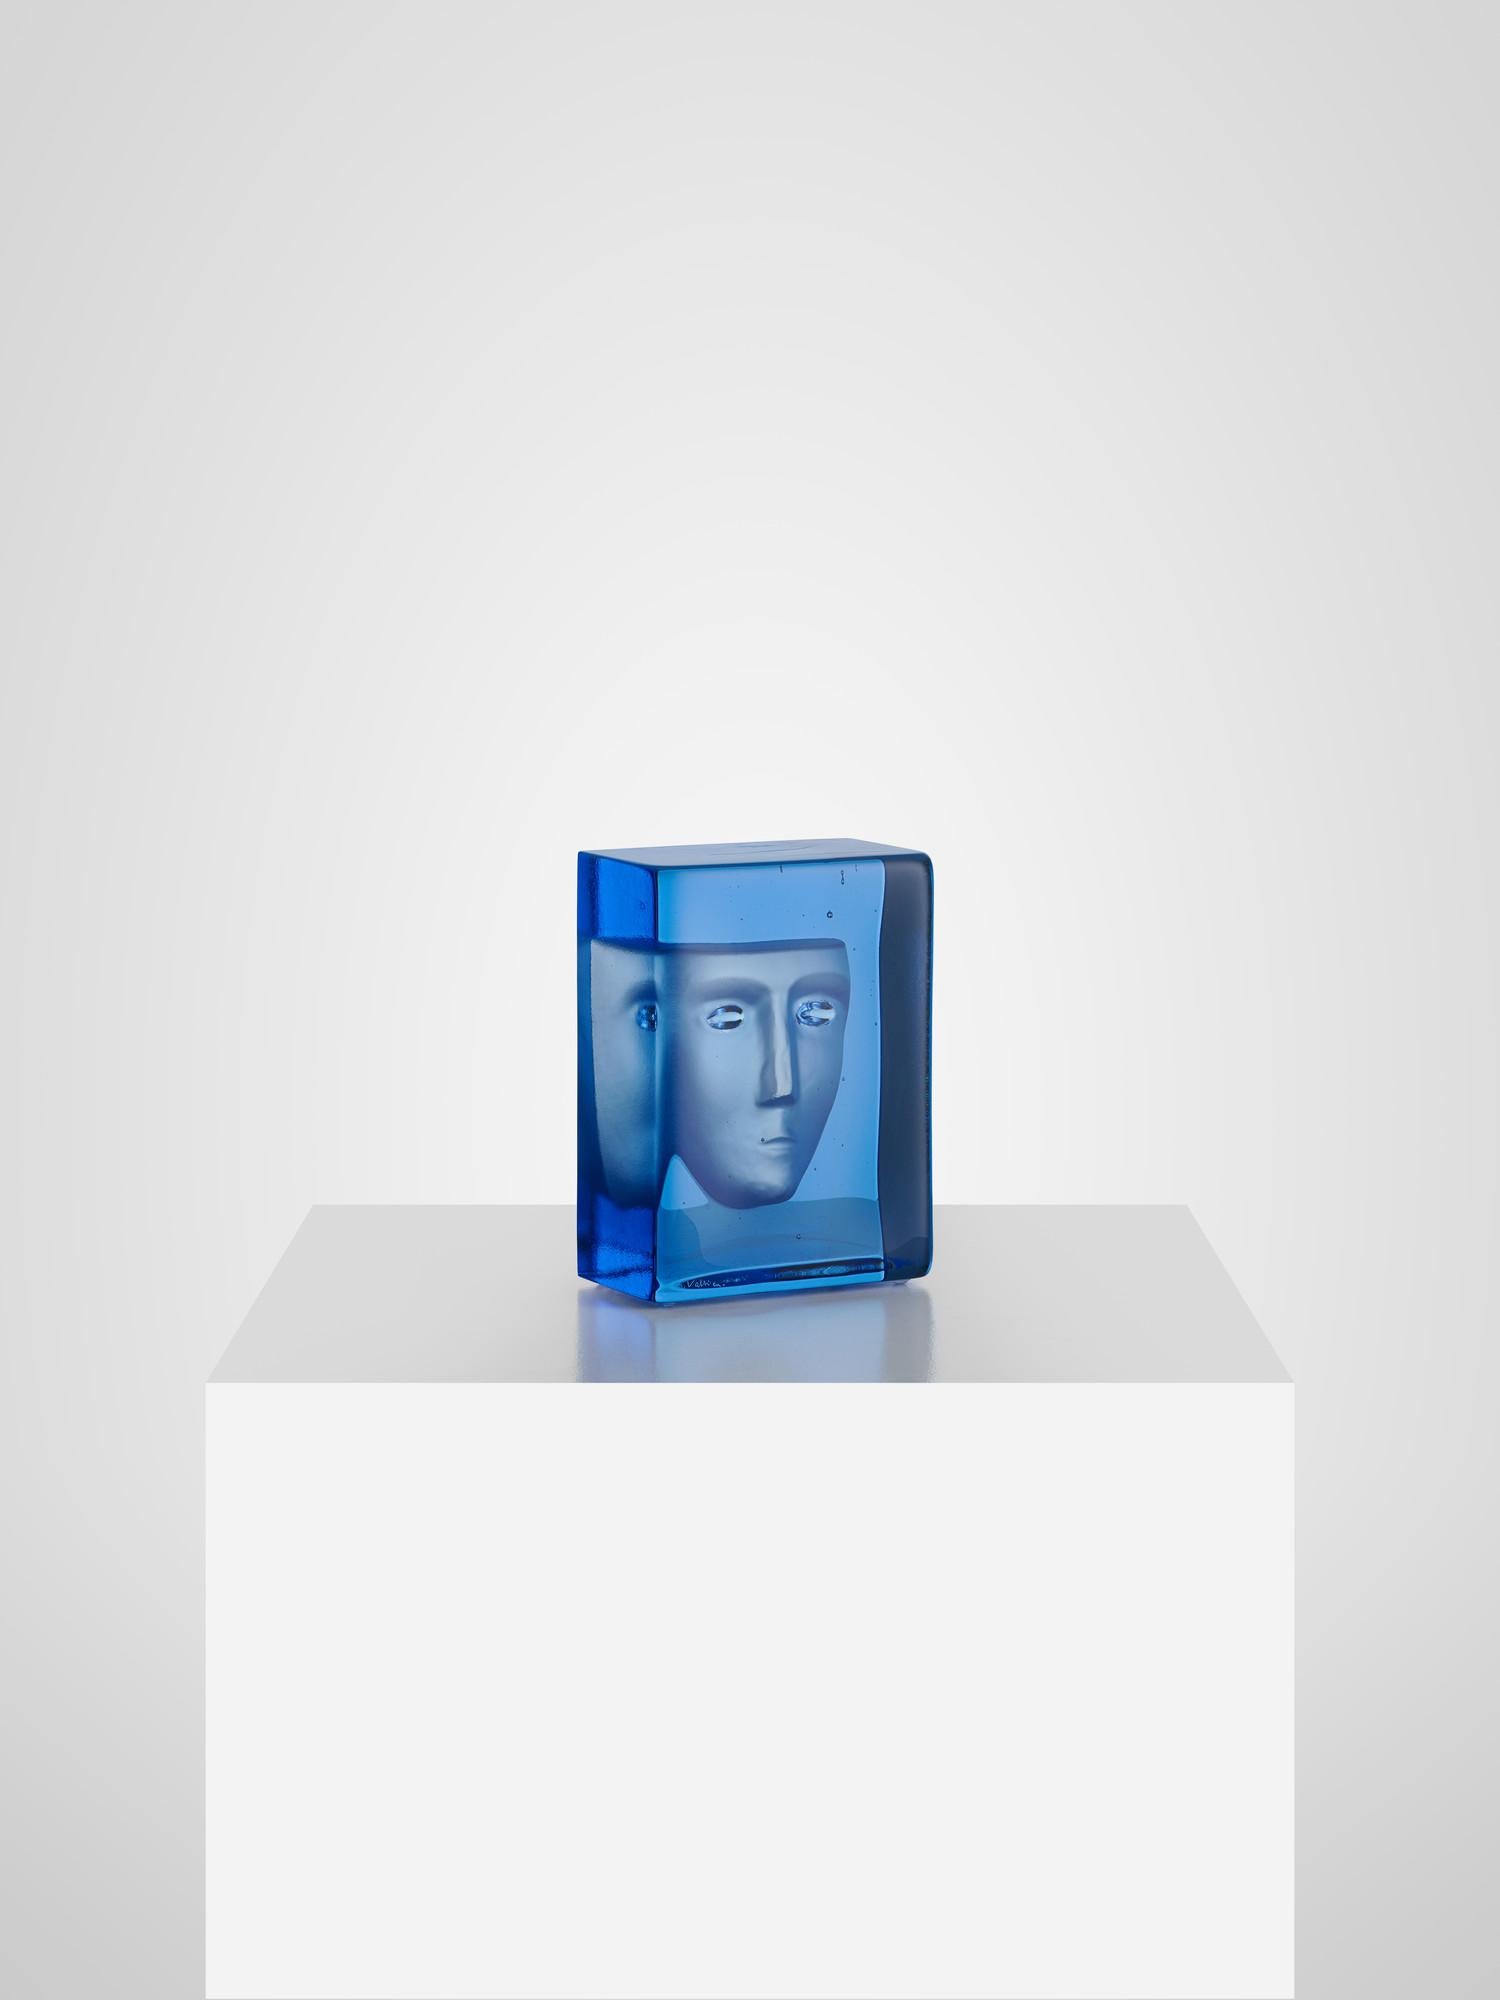 The renowned Swedish glass artist Bertil Vallien has created Azur Frost. It is an exclusive art object in blue glass, cast in a charcoal mold, with a sandblasted imprint of a face. The face is a recurring Bertil Vallien motif – one of his